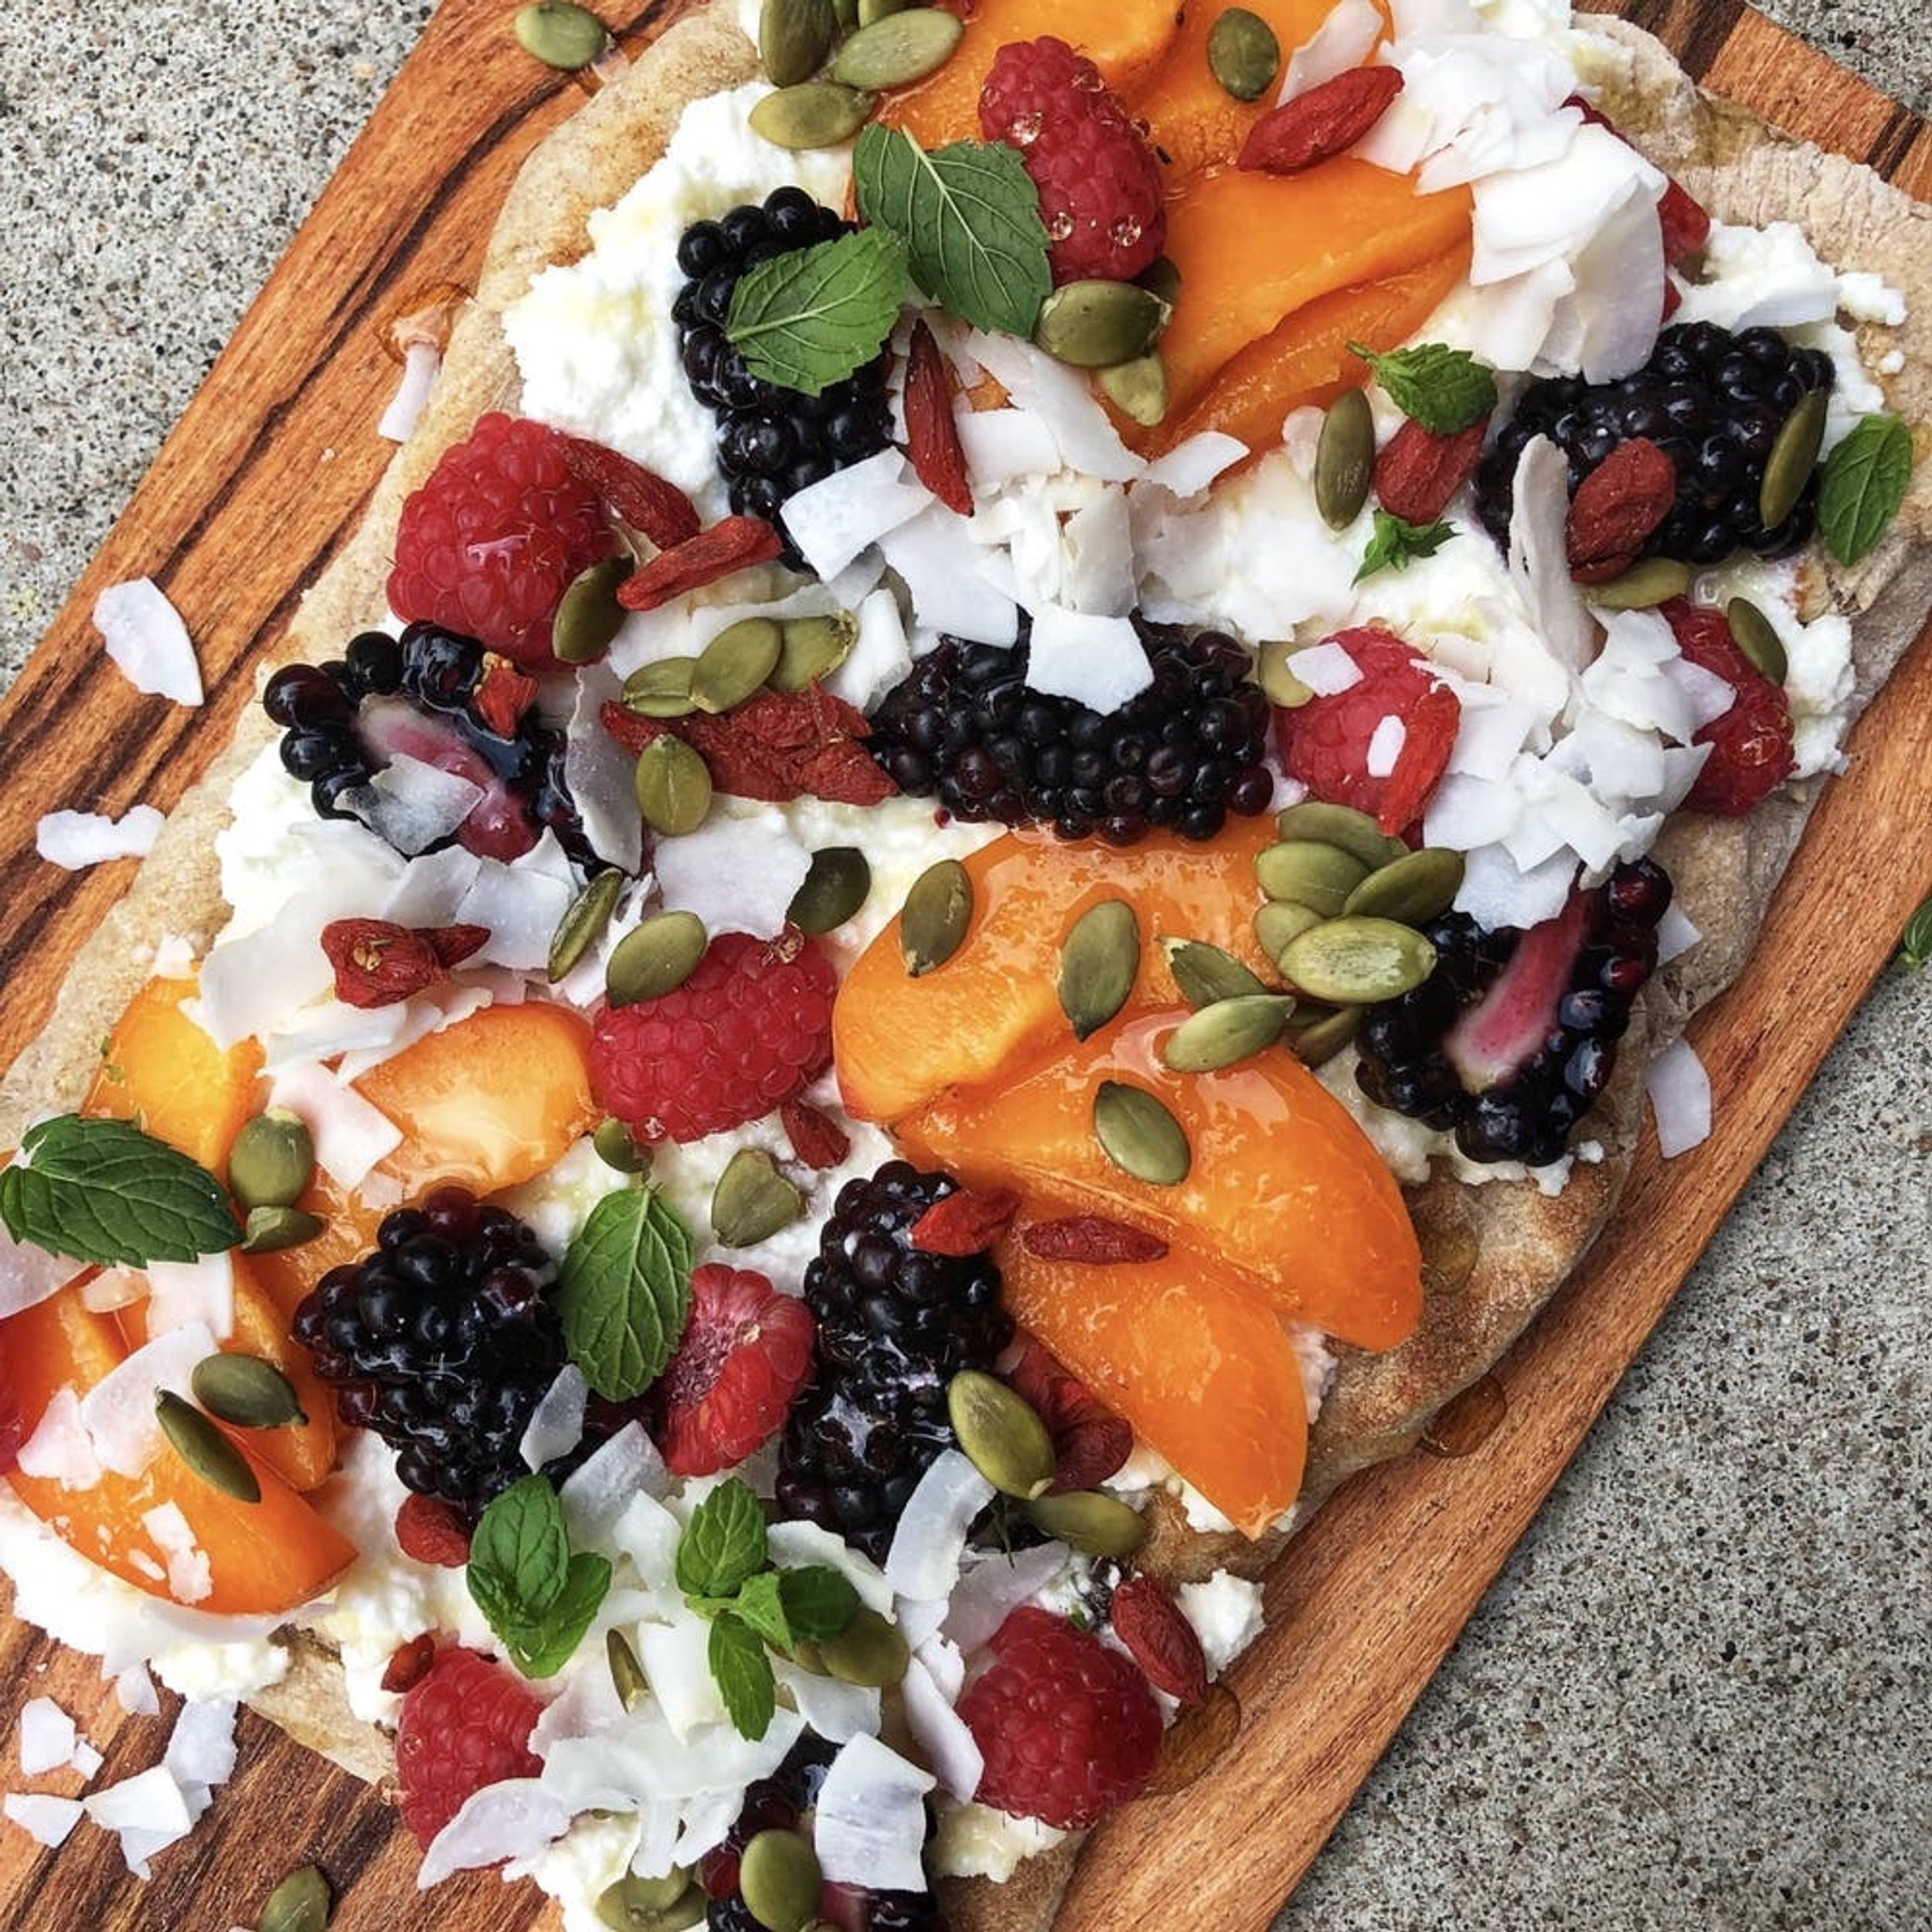 Grilled Dessert Pizza Might Be the Easiest Recipe Ever